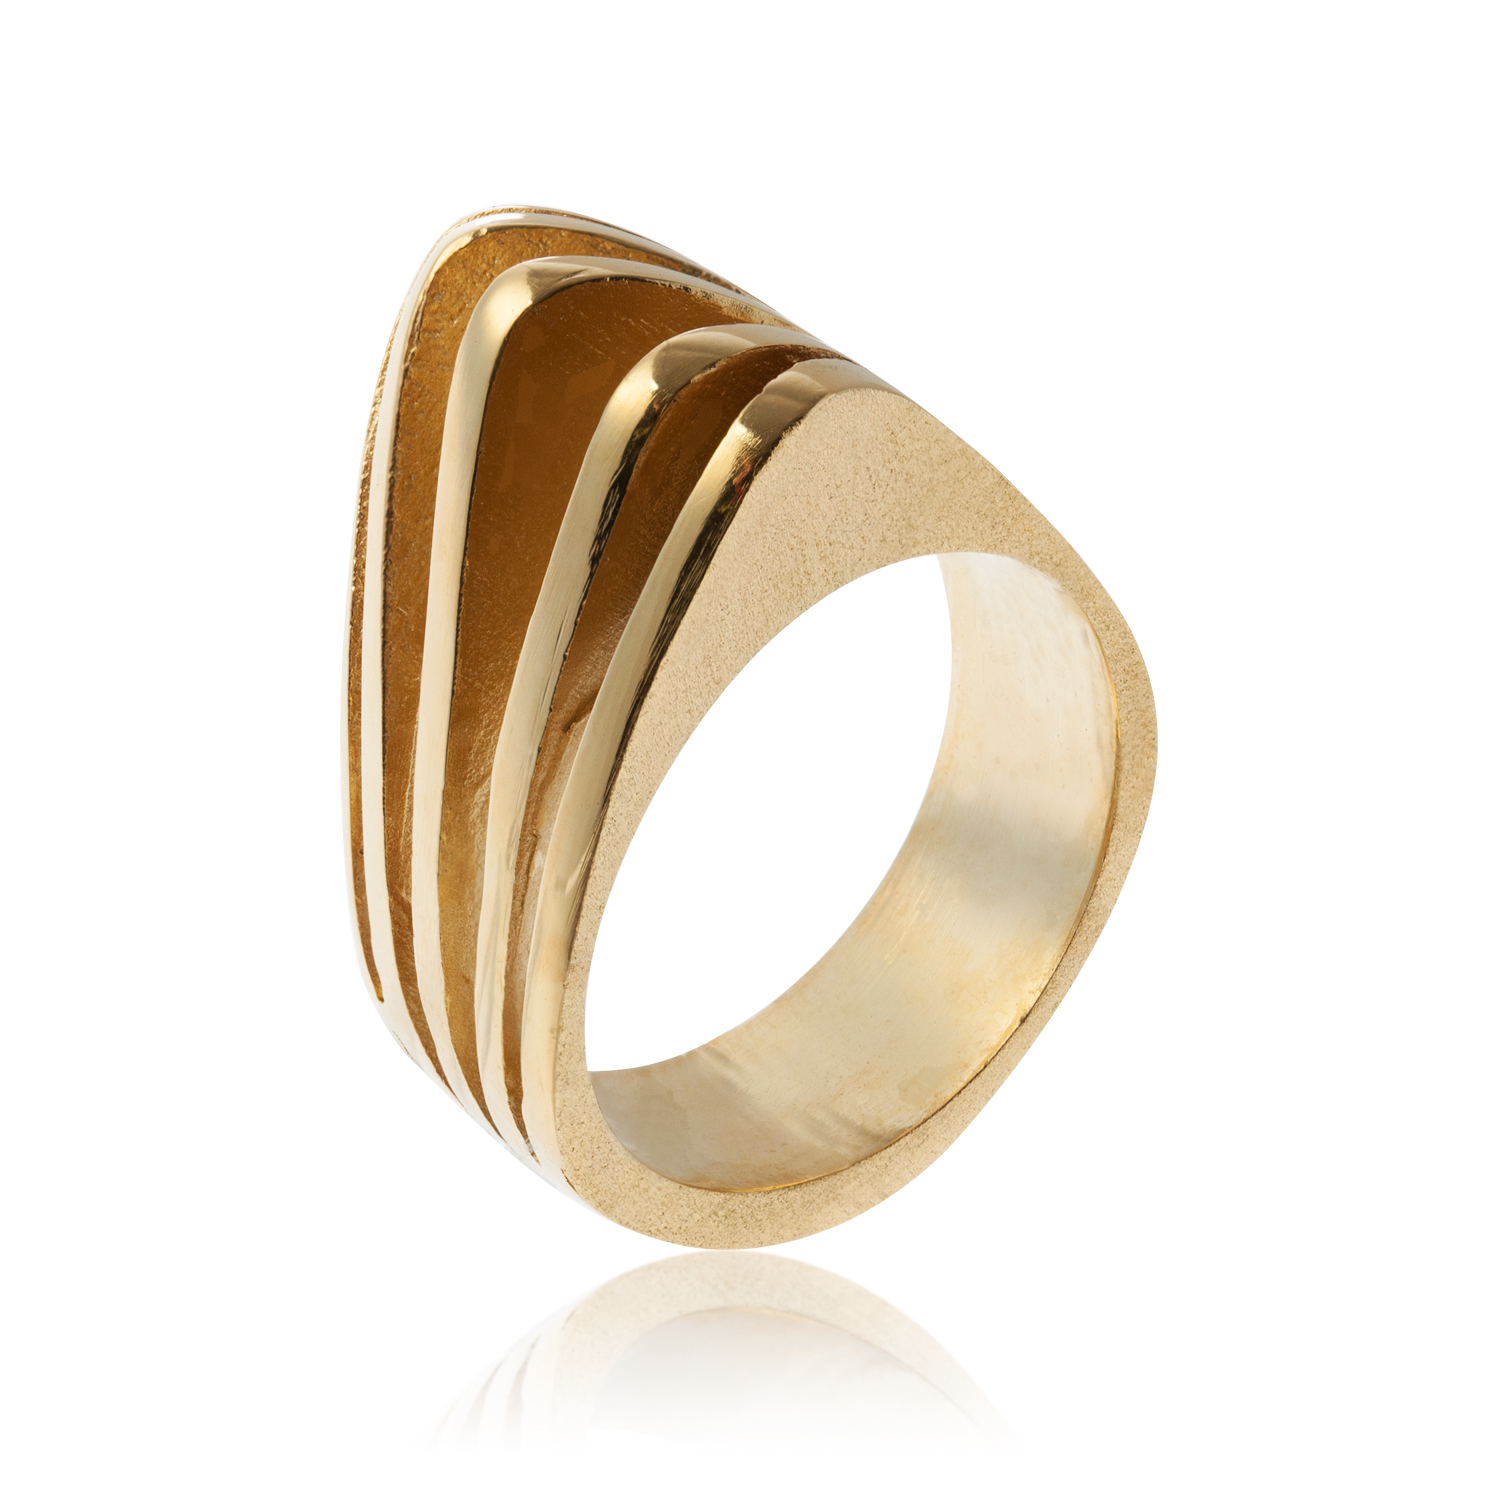 PARABOLA gold plated ring